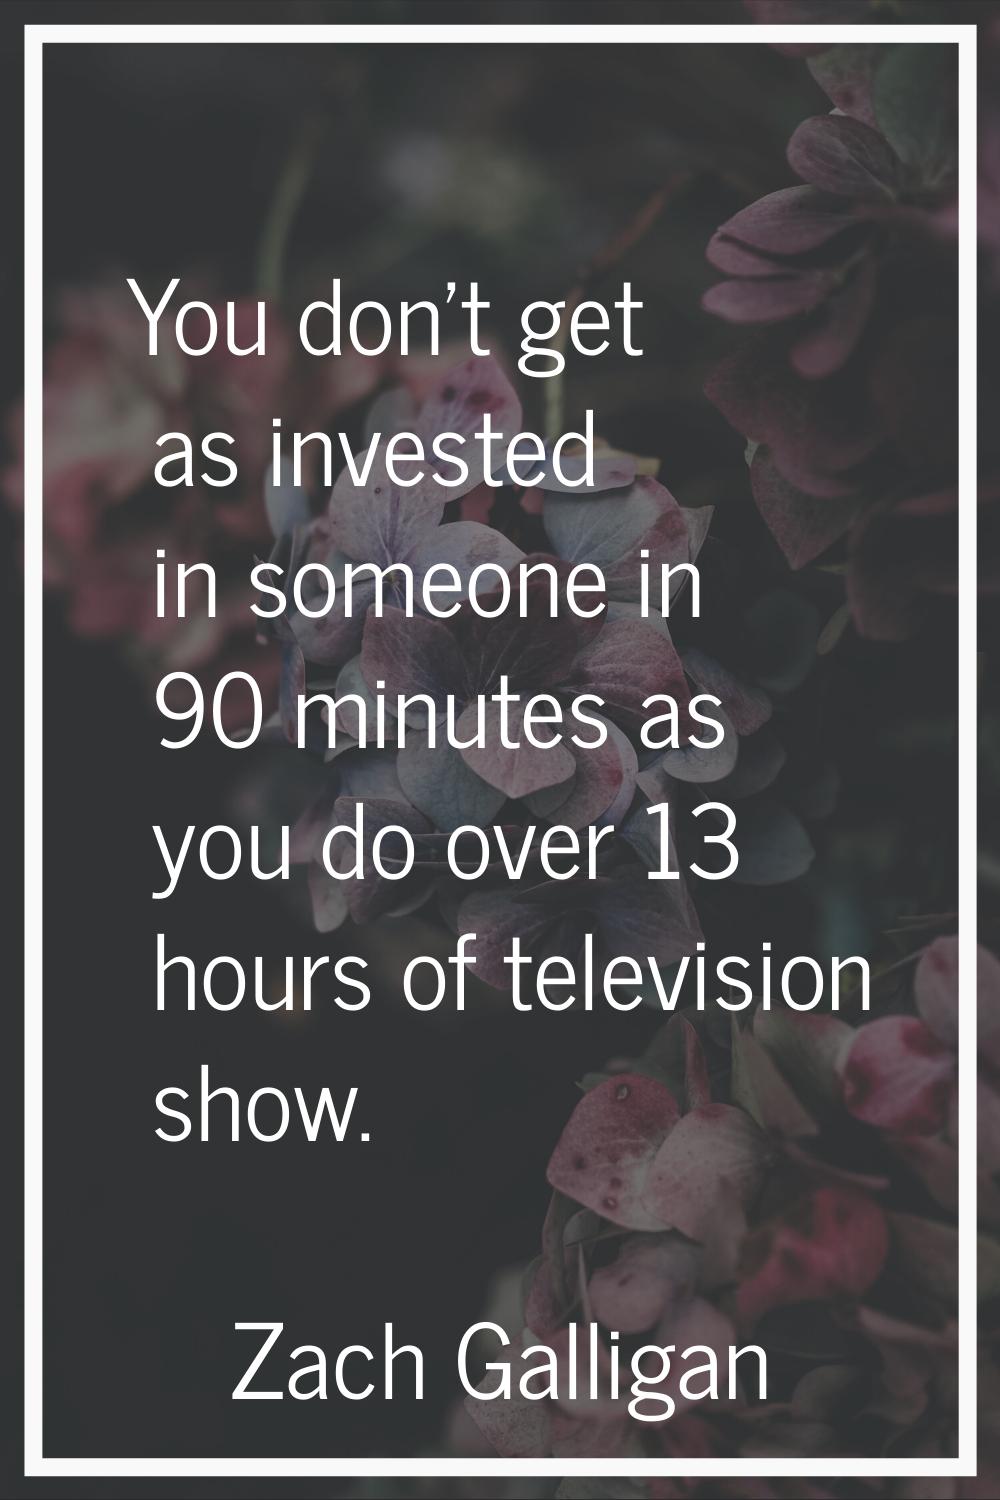 You don't get as invested in someone in 90 minutes as you do over 13 hours of television show.